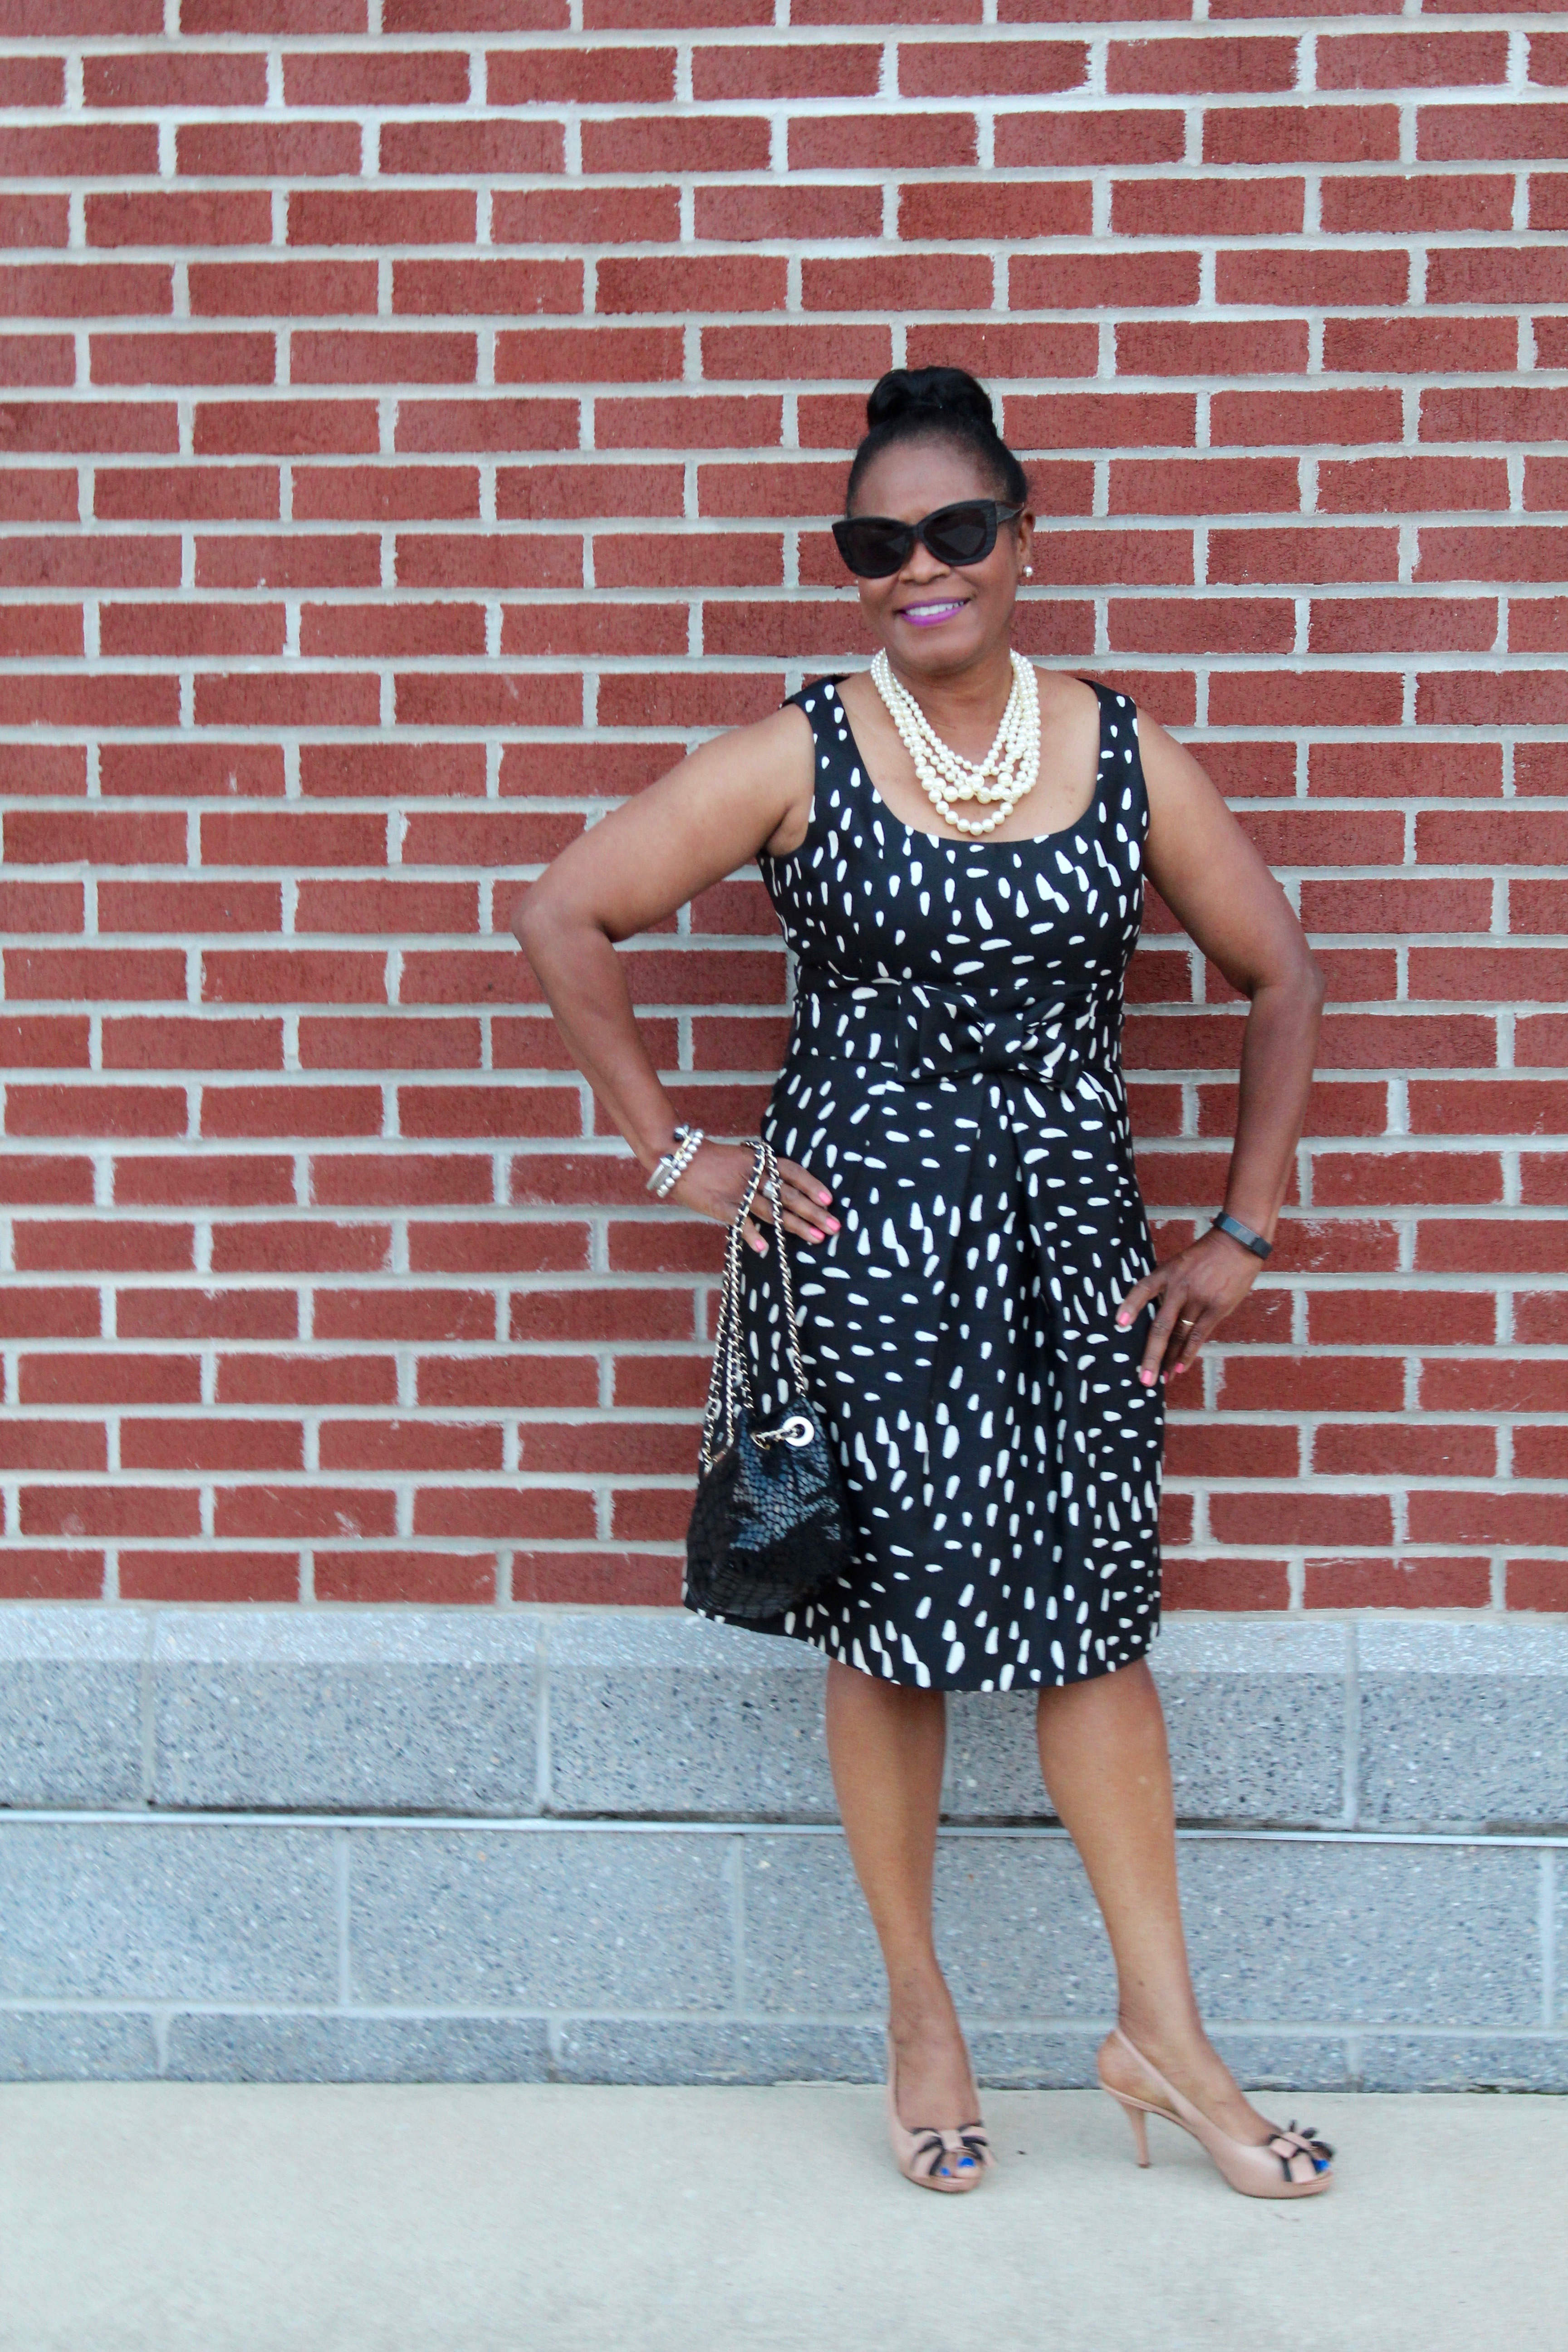 Wearing: Old Teri Jon Black and White Dress, Old Kate Spade Pumps, Old Kate Spade Chain Bag with J. Crew Factory Pearls and Dita Sunnies